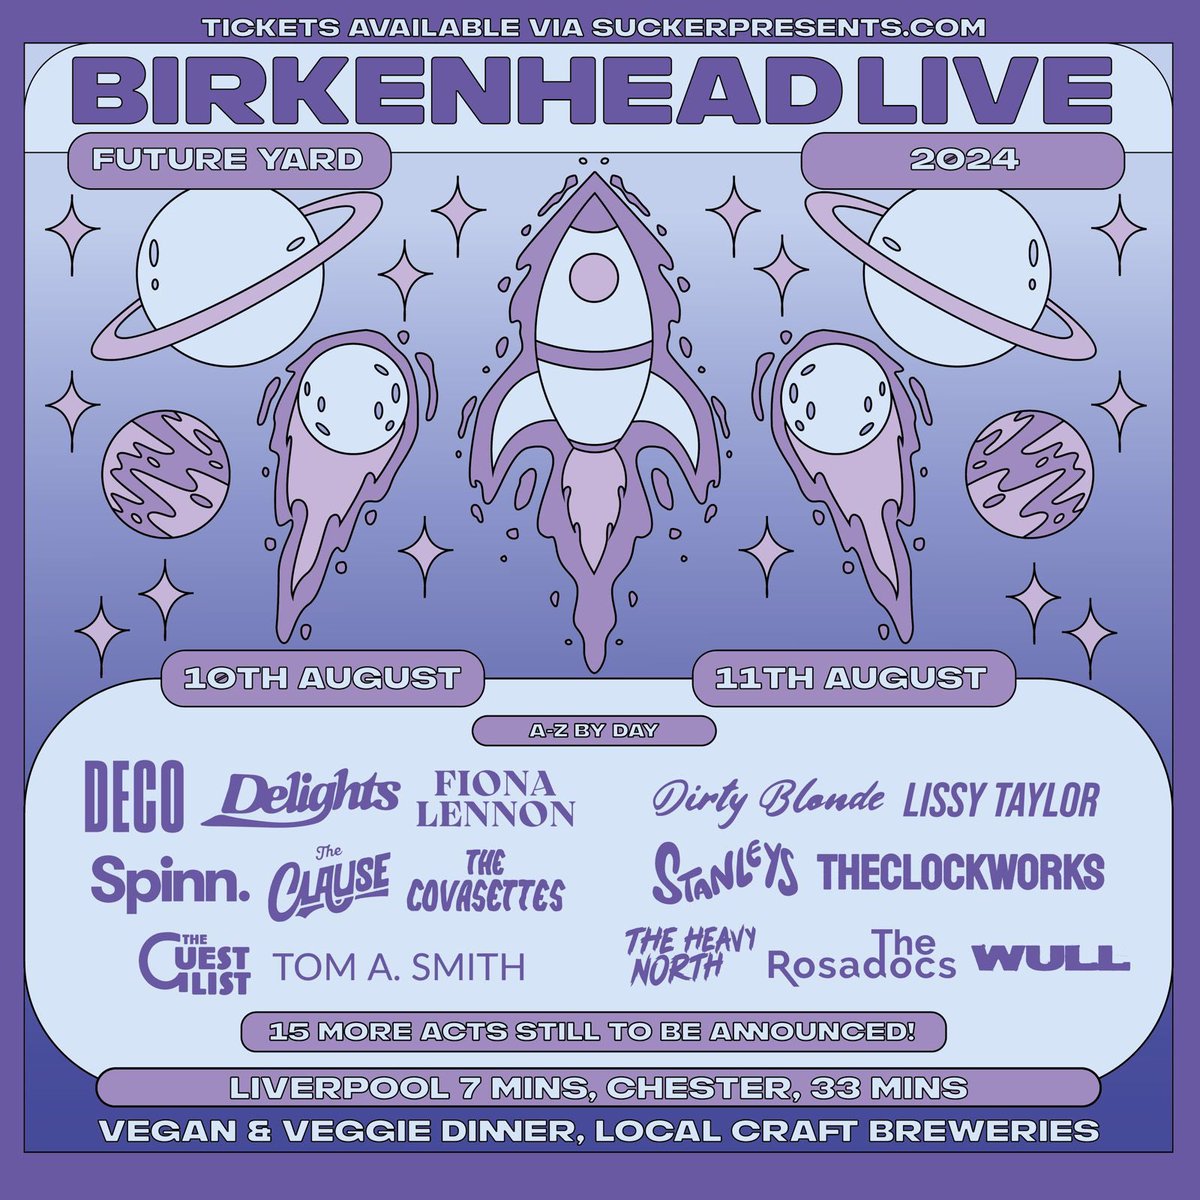 The Birkenhead Live 2024 line-up so far 😍 Another band announced at 5pm today 👀 

Make sure you get your tickets from linktr.ee/birkenheadlive 🚀